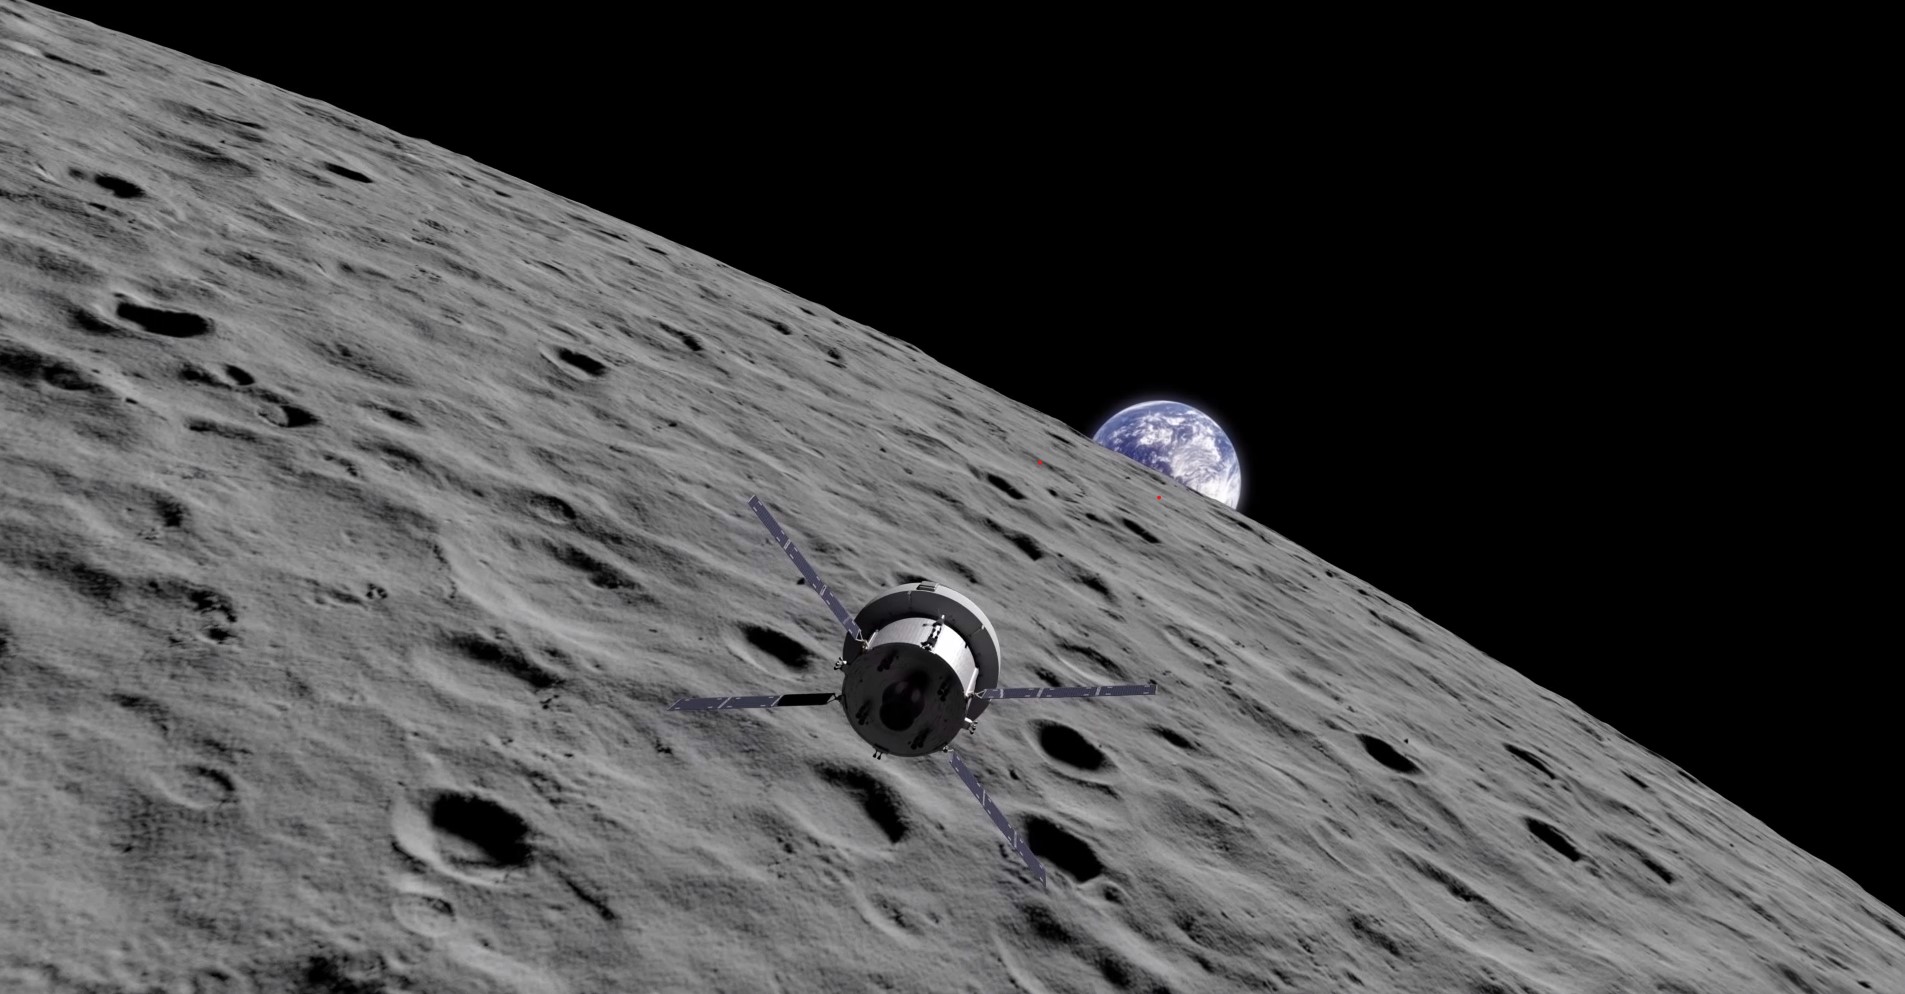 Illustration showing spacecraft orbiting the Moon, with Earth rising in the background